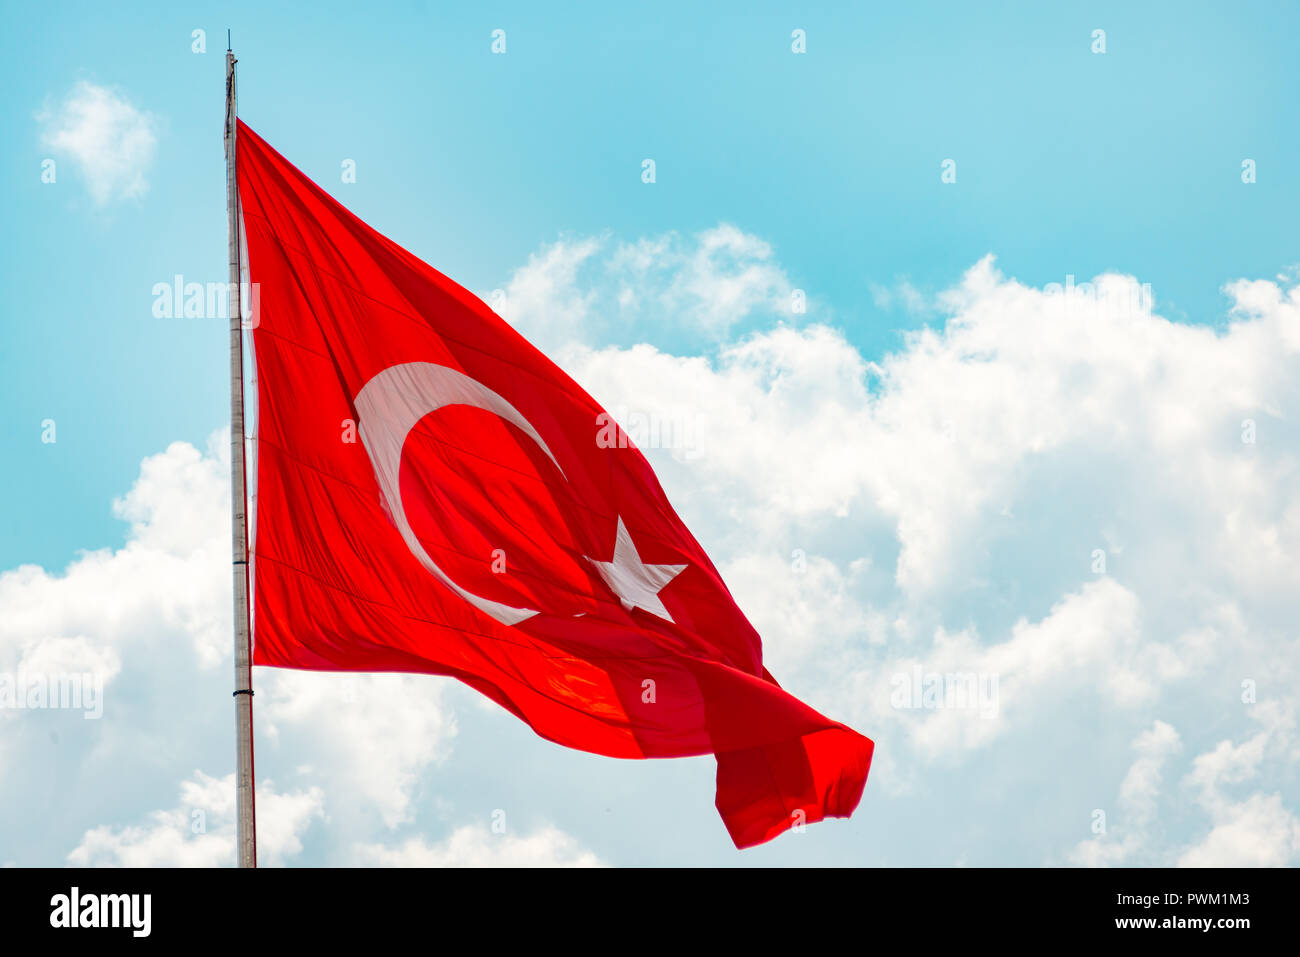 Metal pole with waving banner. Red flag with crescent moon and star, blue  sky with clouds in background. Rippled texture. National flag of Turkey.  Pop Stock Photo - Alamy